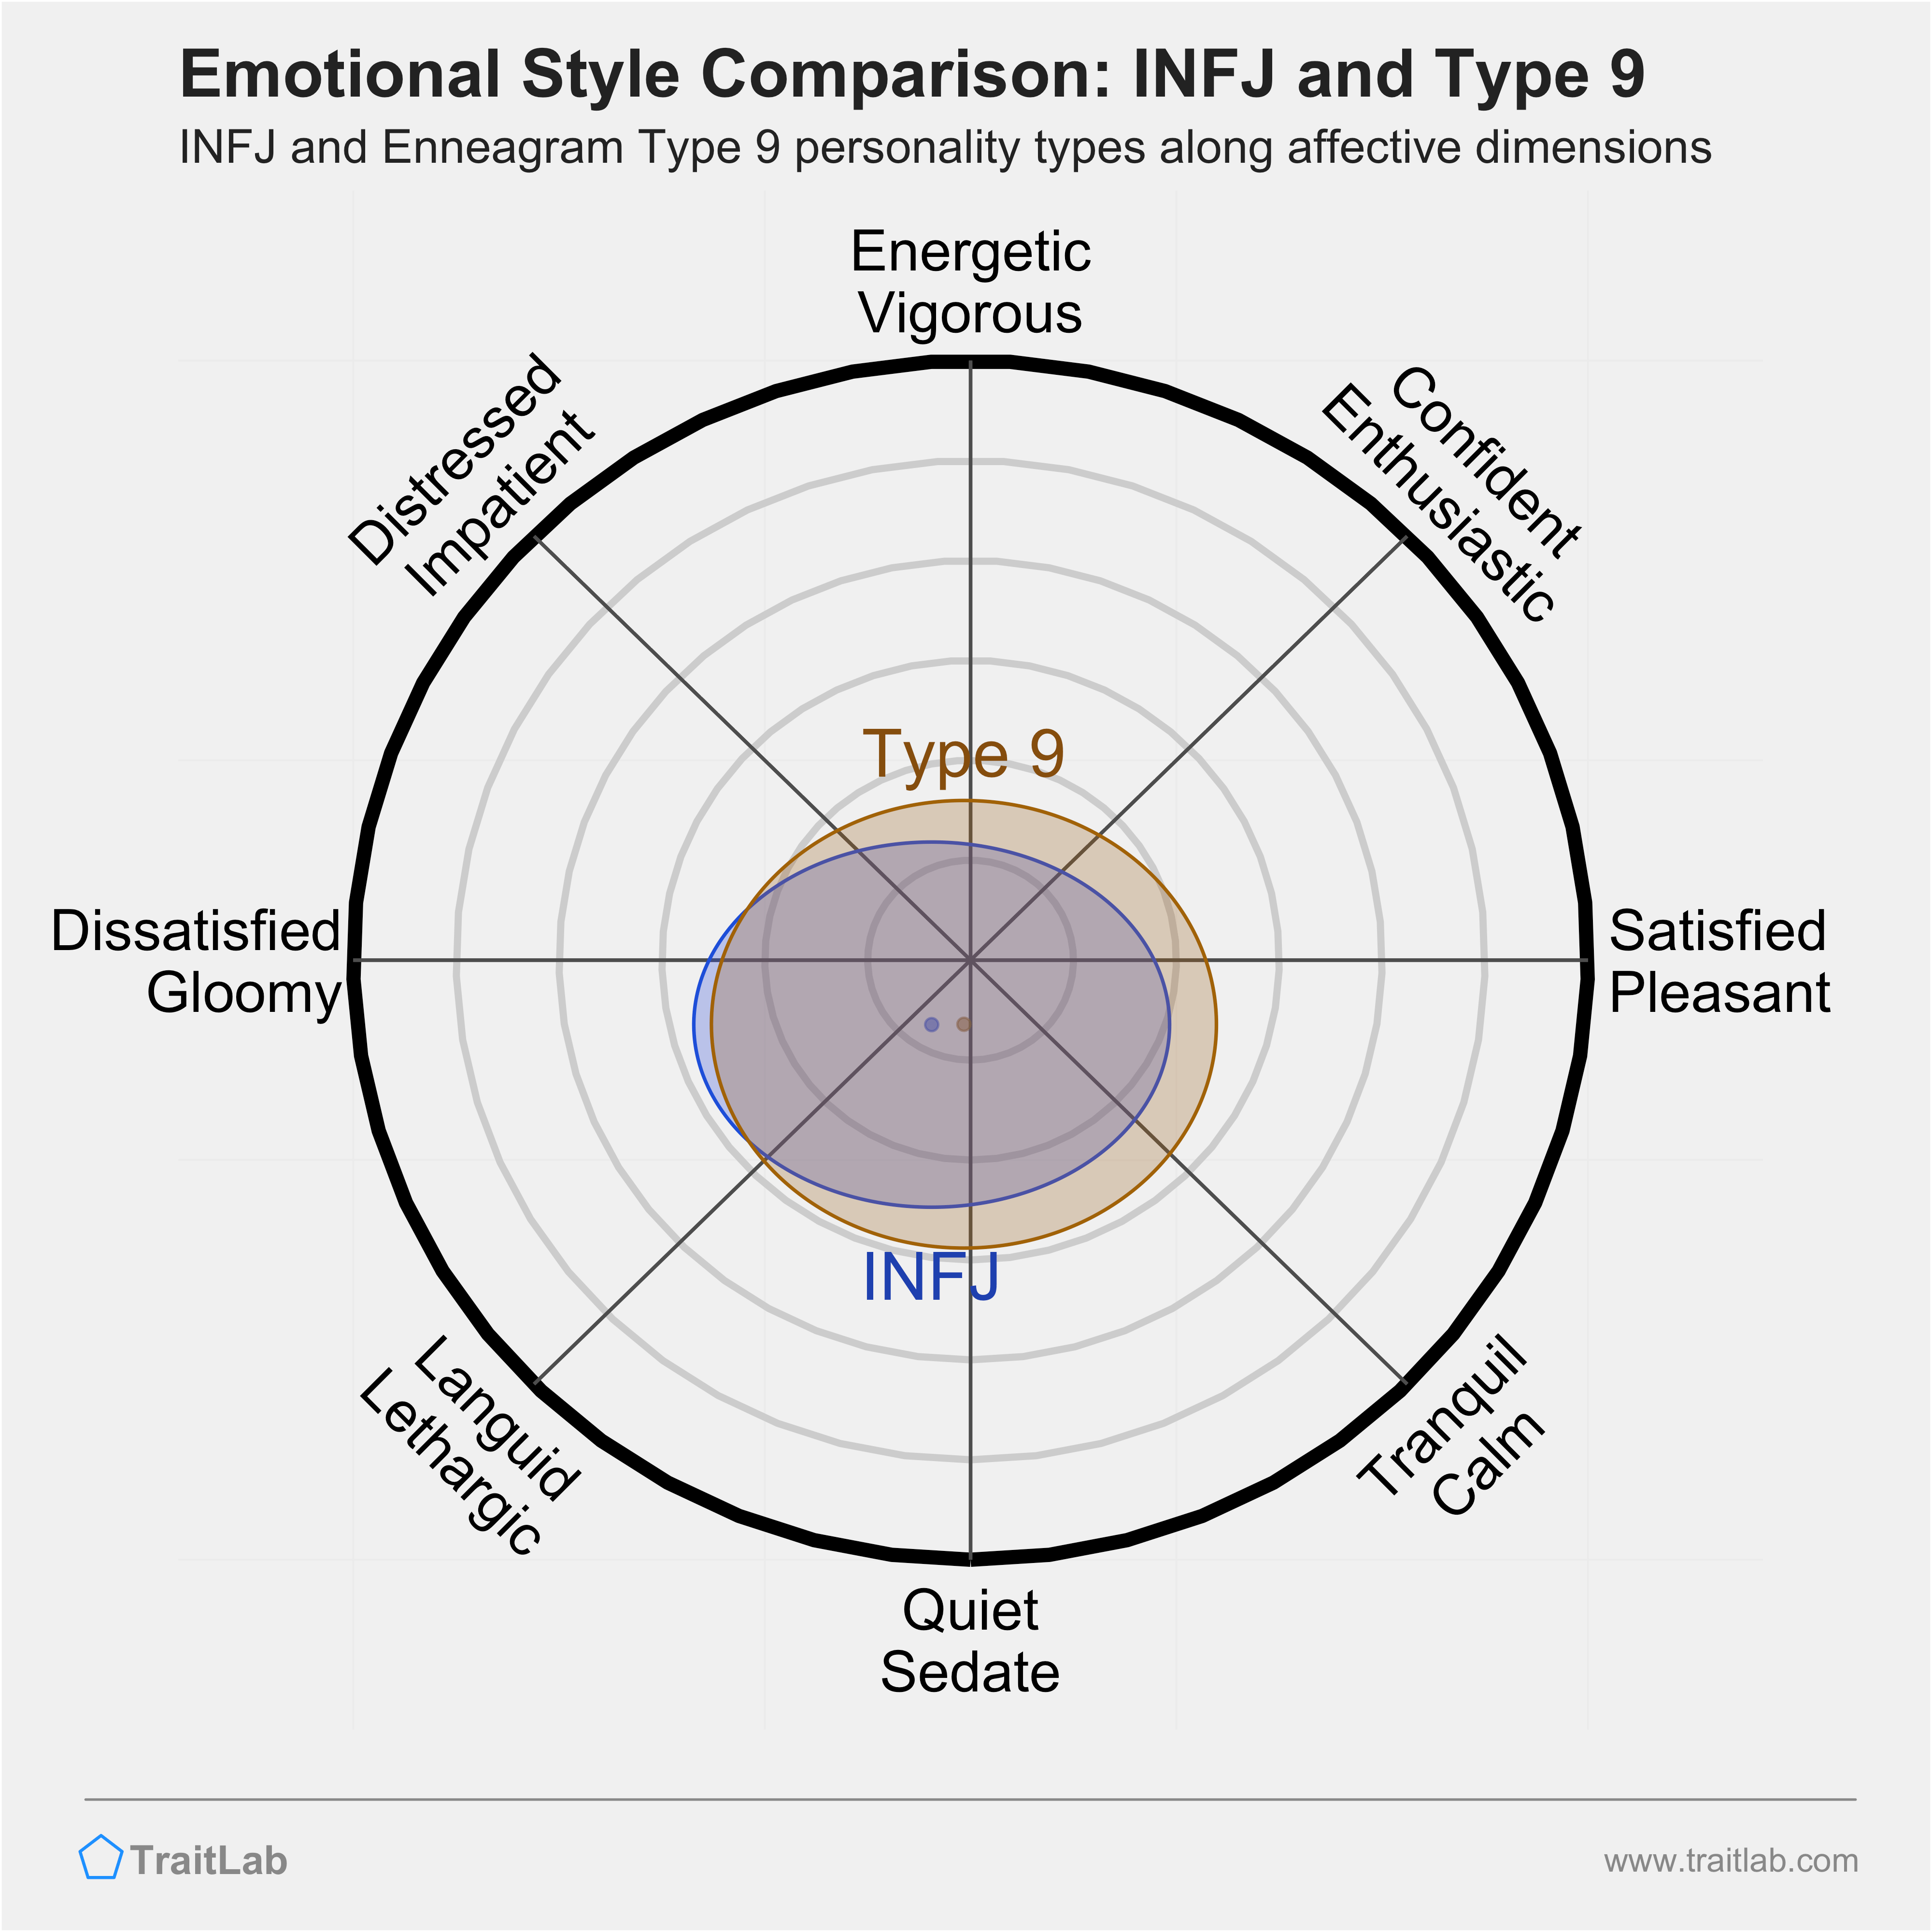 INFJ and Type 9 comparison across emotional (affective) dimensions